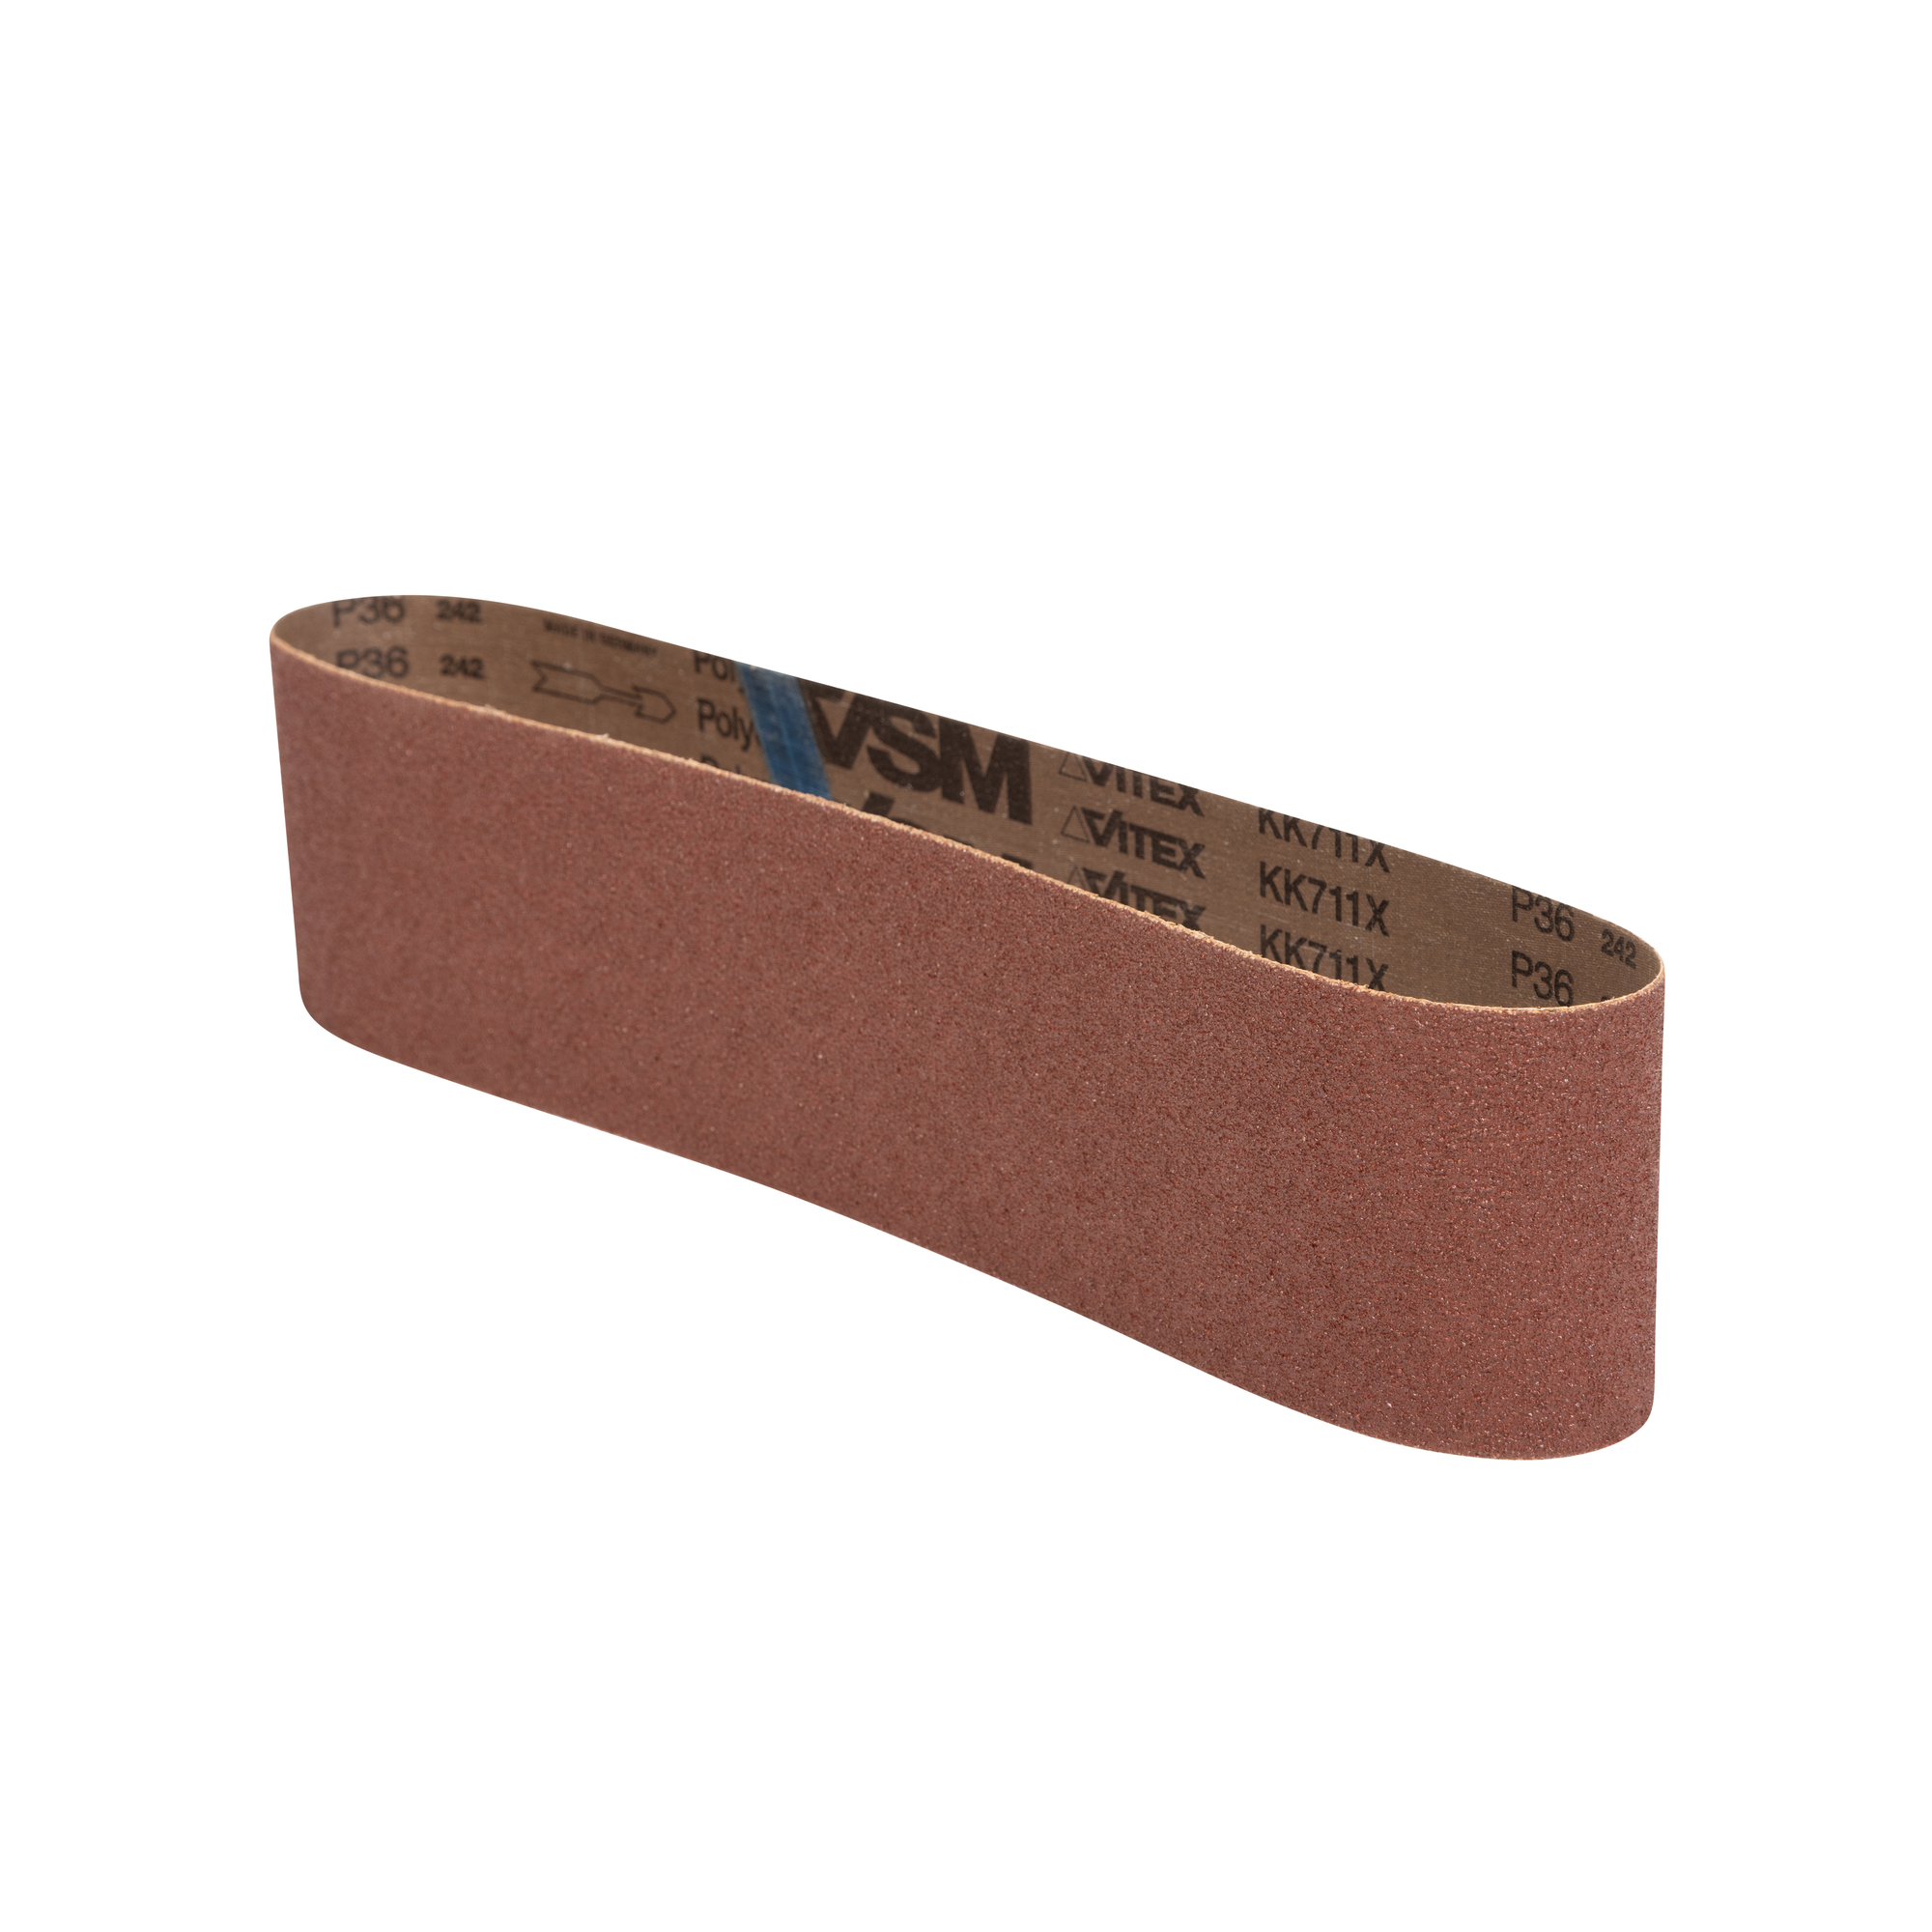 JET, Sand Paper, Pieces (qty.) 3 Grit 60 Length 36 in, Model 577531